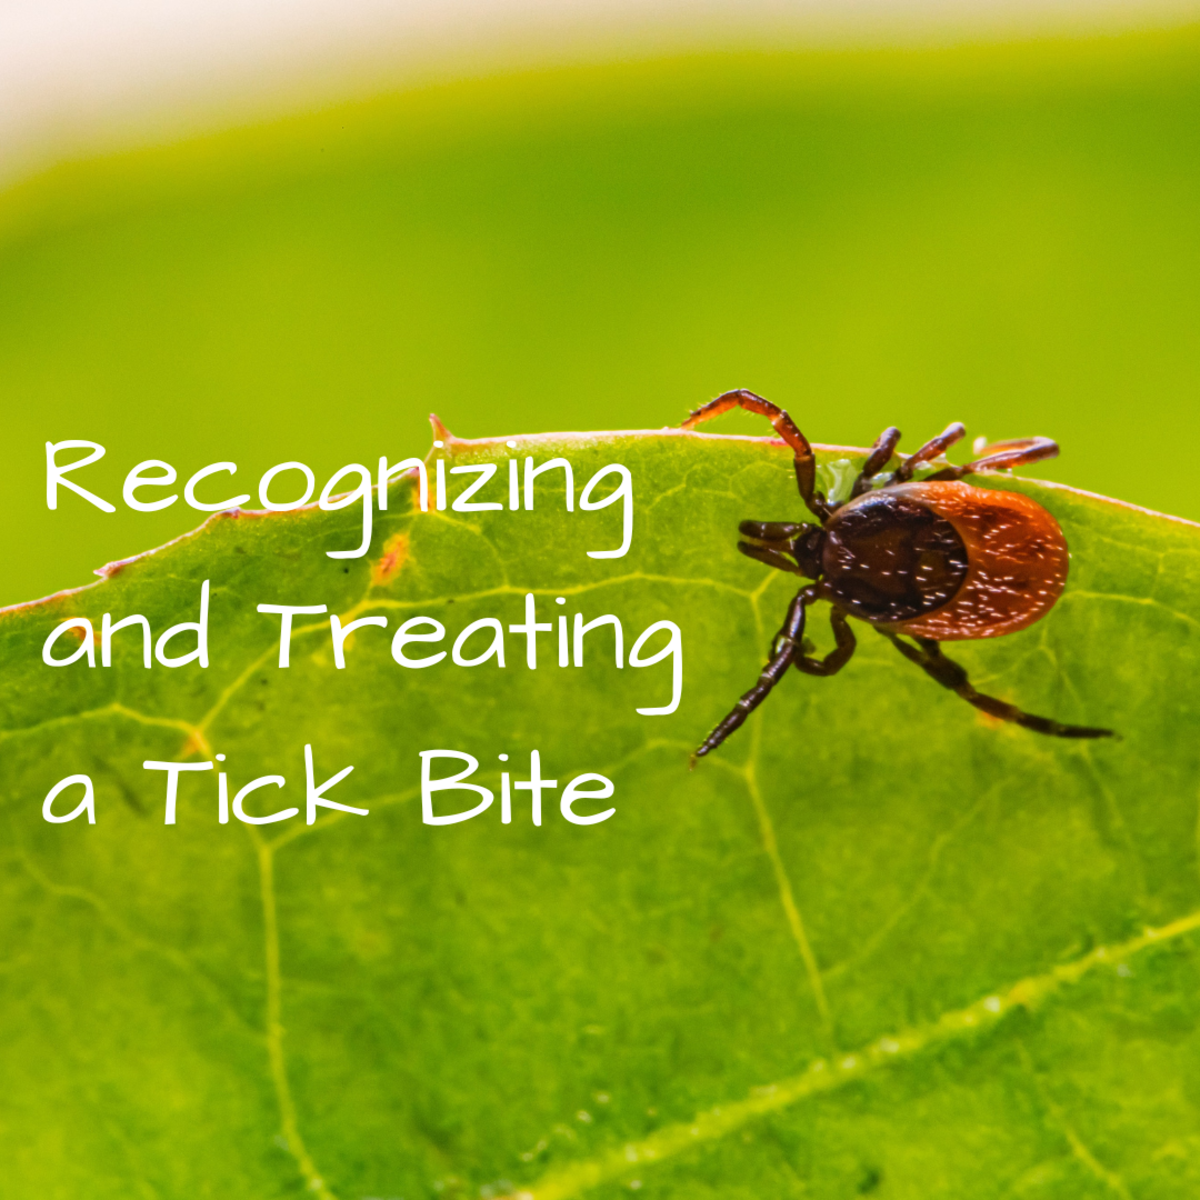 How can you recognize and treat a tick bite?